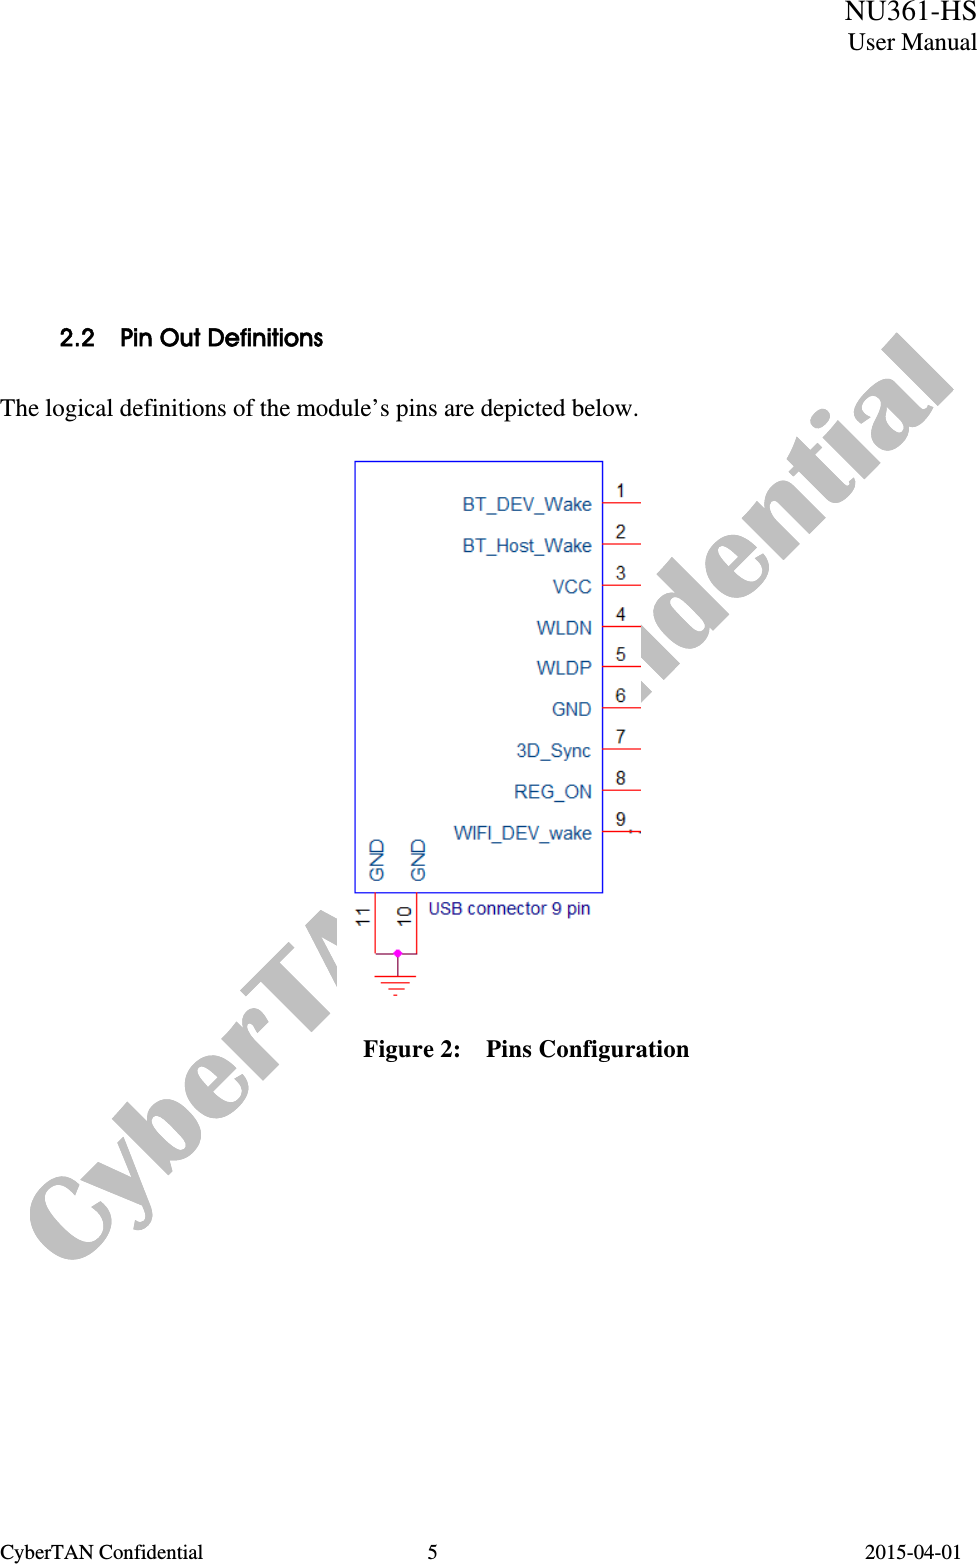  NU361-HS User Manual CyberTAN Confidential  5                                         2015-04-01          2.2  Pin Out Definitions   The logical definitions of the module’s pins are depicted below.       Figure 2:  Pins Configuration  